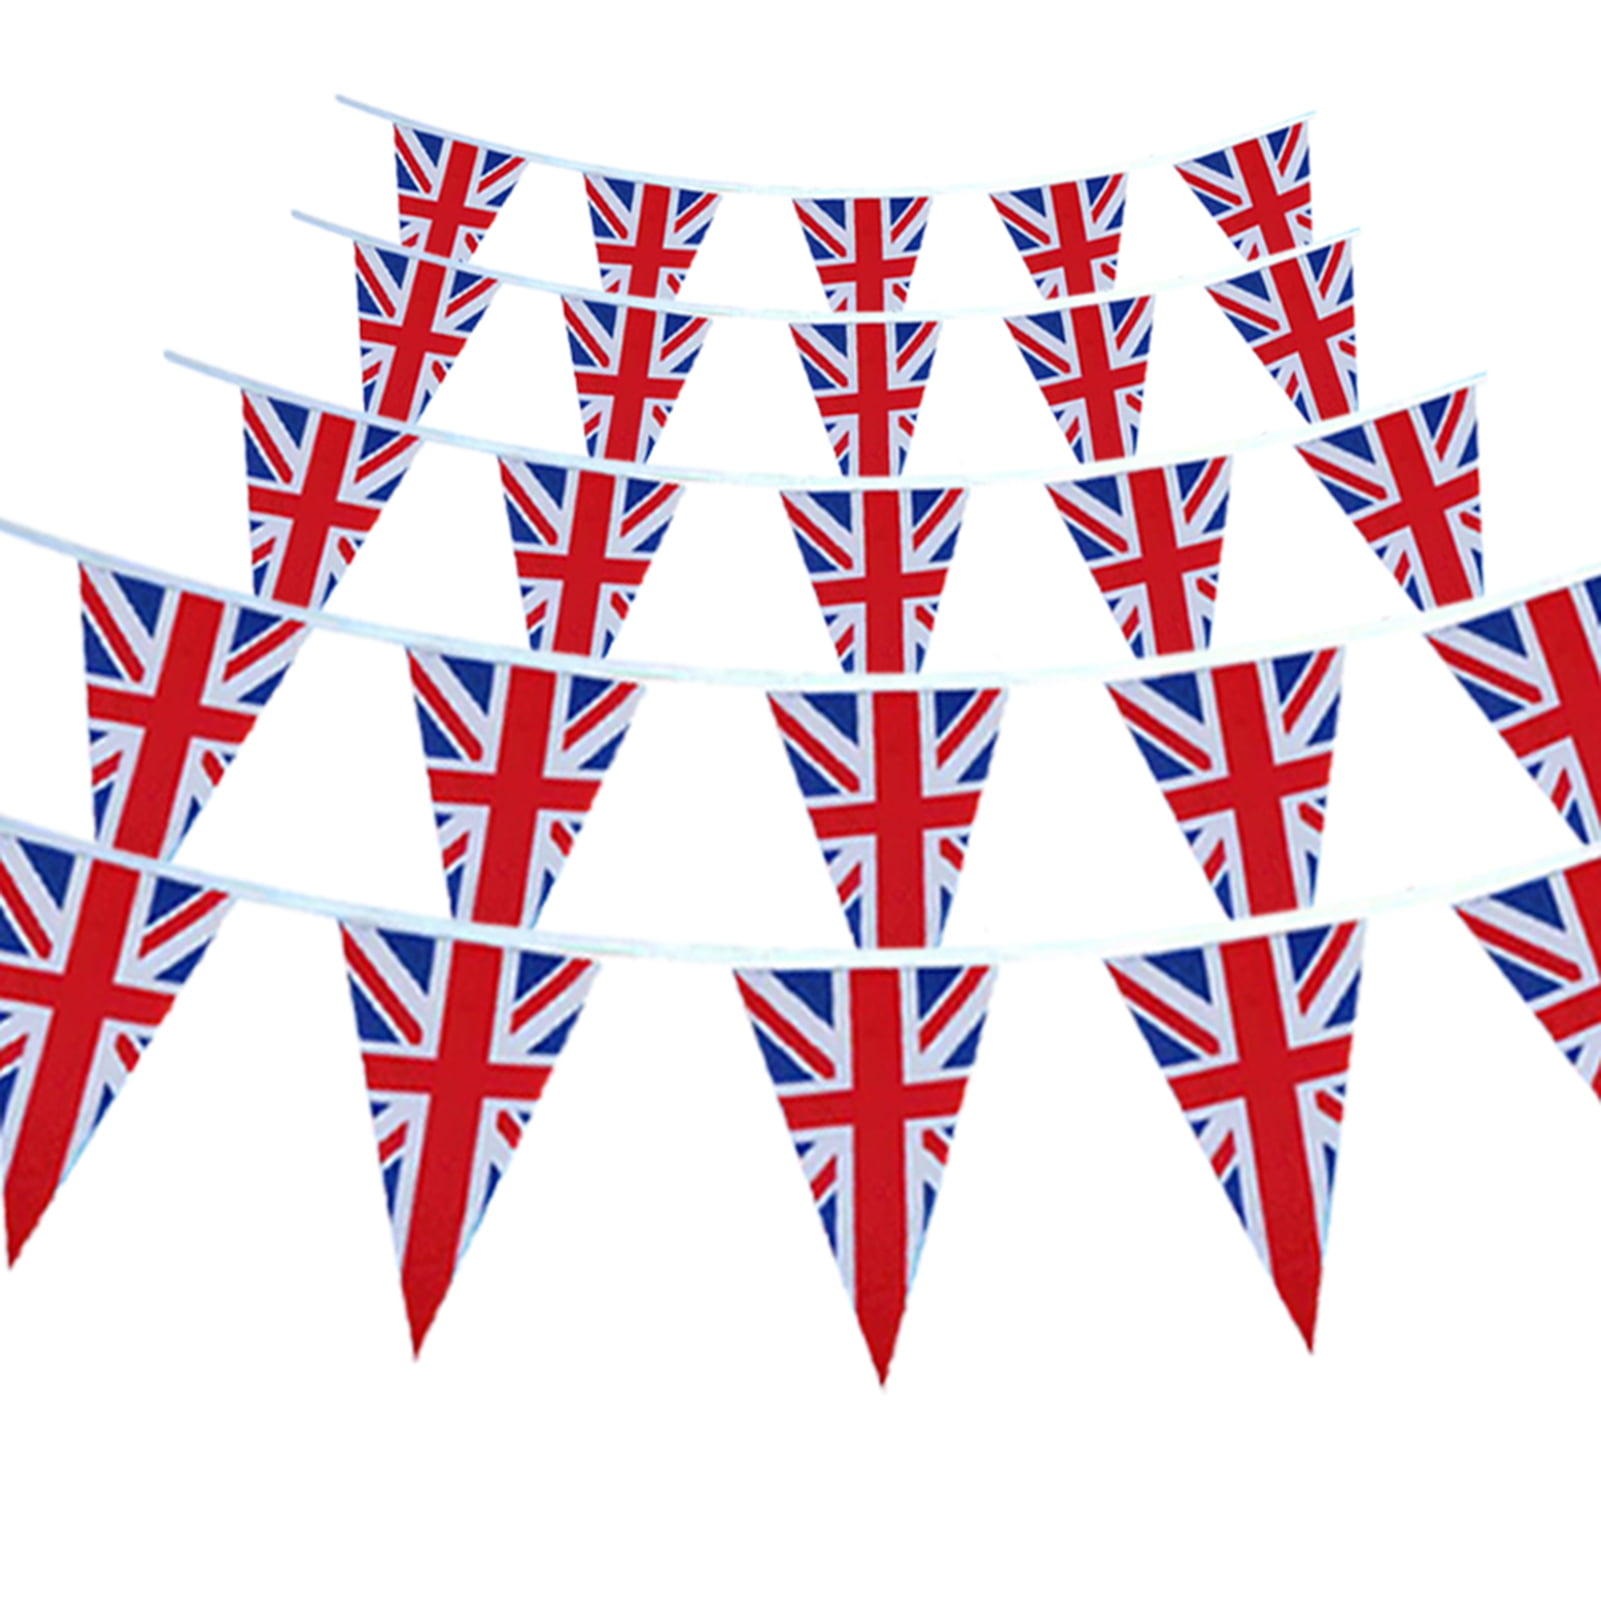 Hot Bunting Banner Plastic Bunting British Union Jack UK Flag Party Supplies^ 